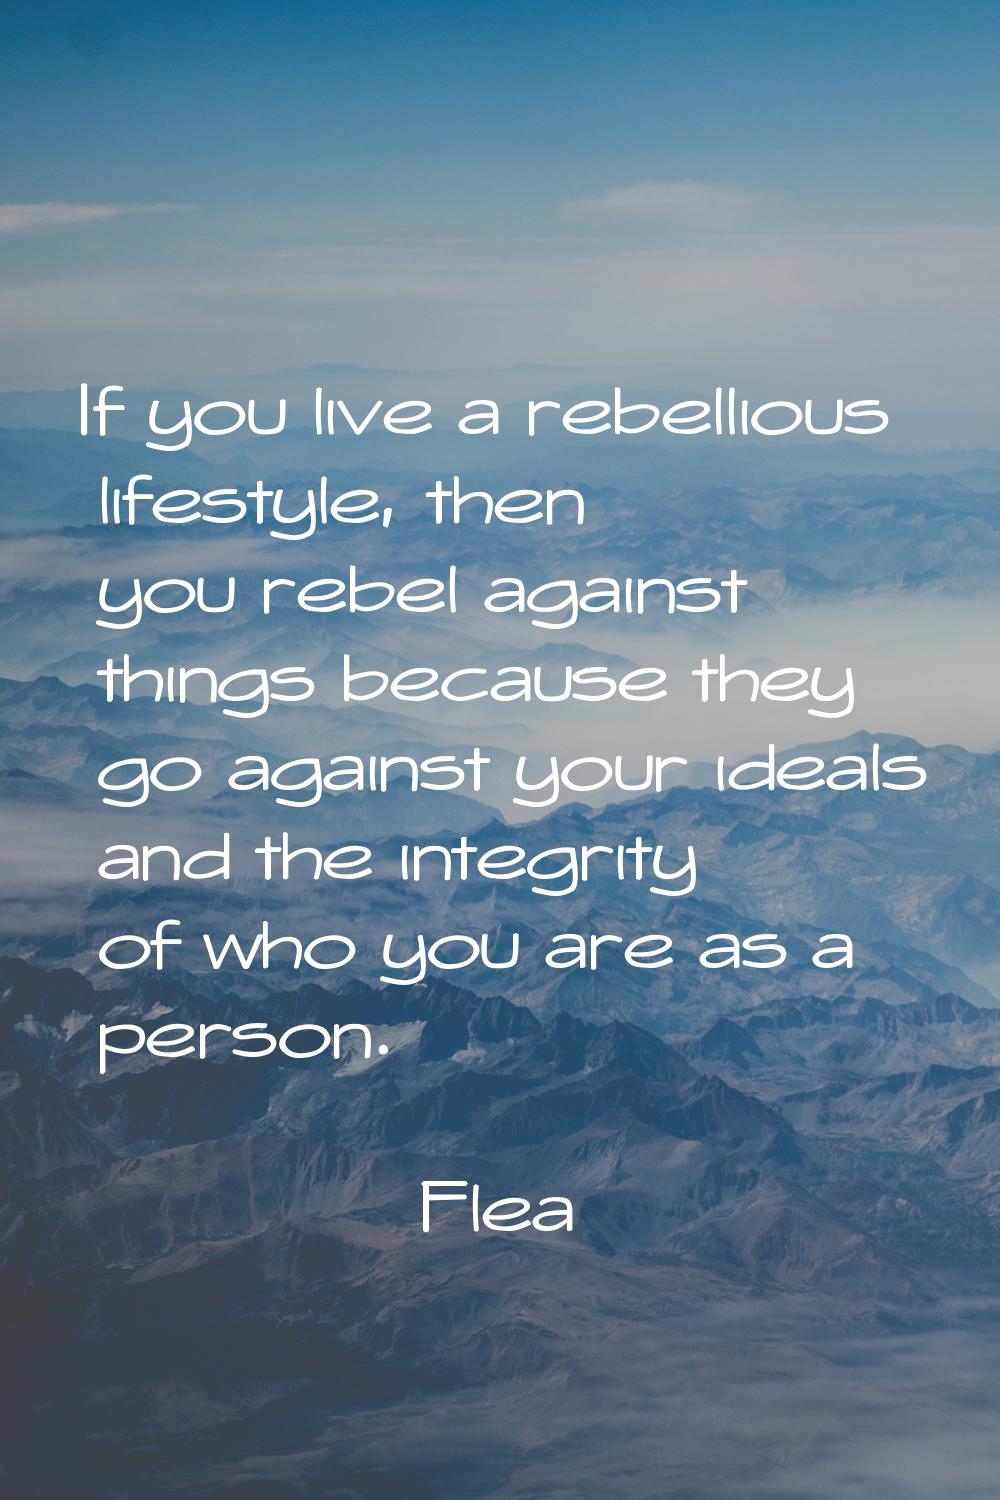 If you live a rebellious lifestyle, then you rebel against things because they go against your idea